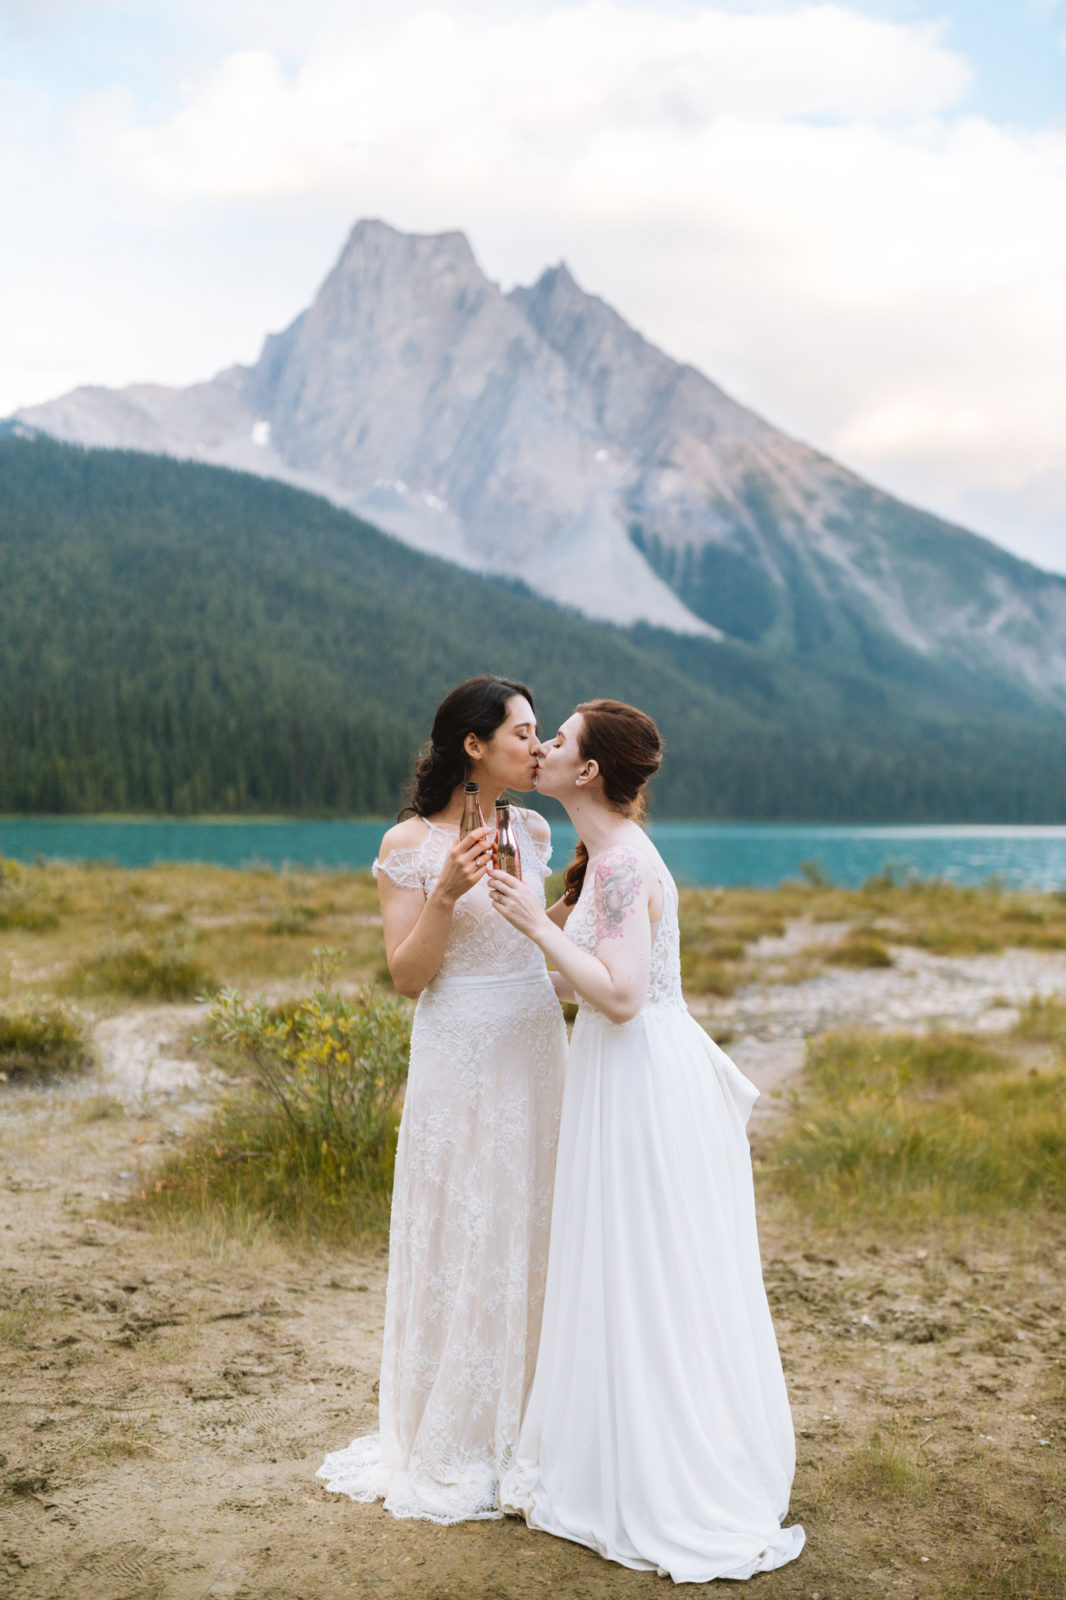 Newly wed couple shares champagne and a kiss on the shores of Emerald Lake with Yoho National Park mountains in the background